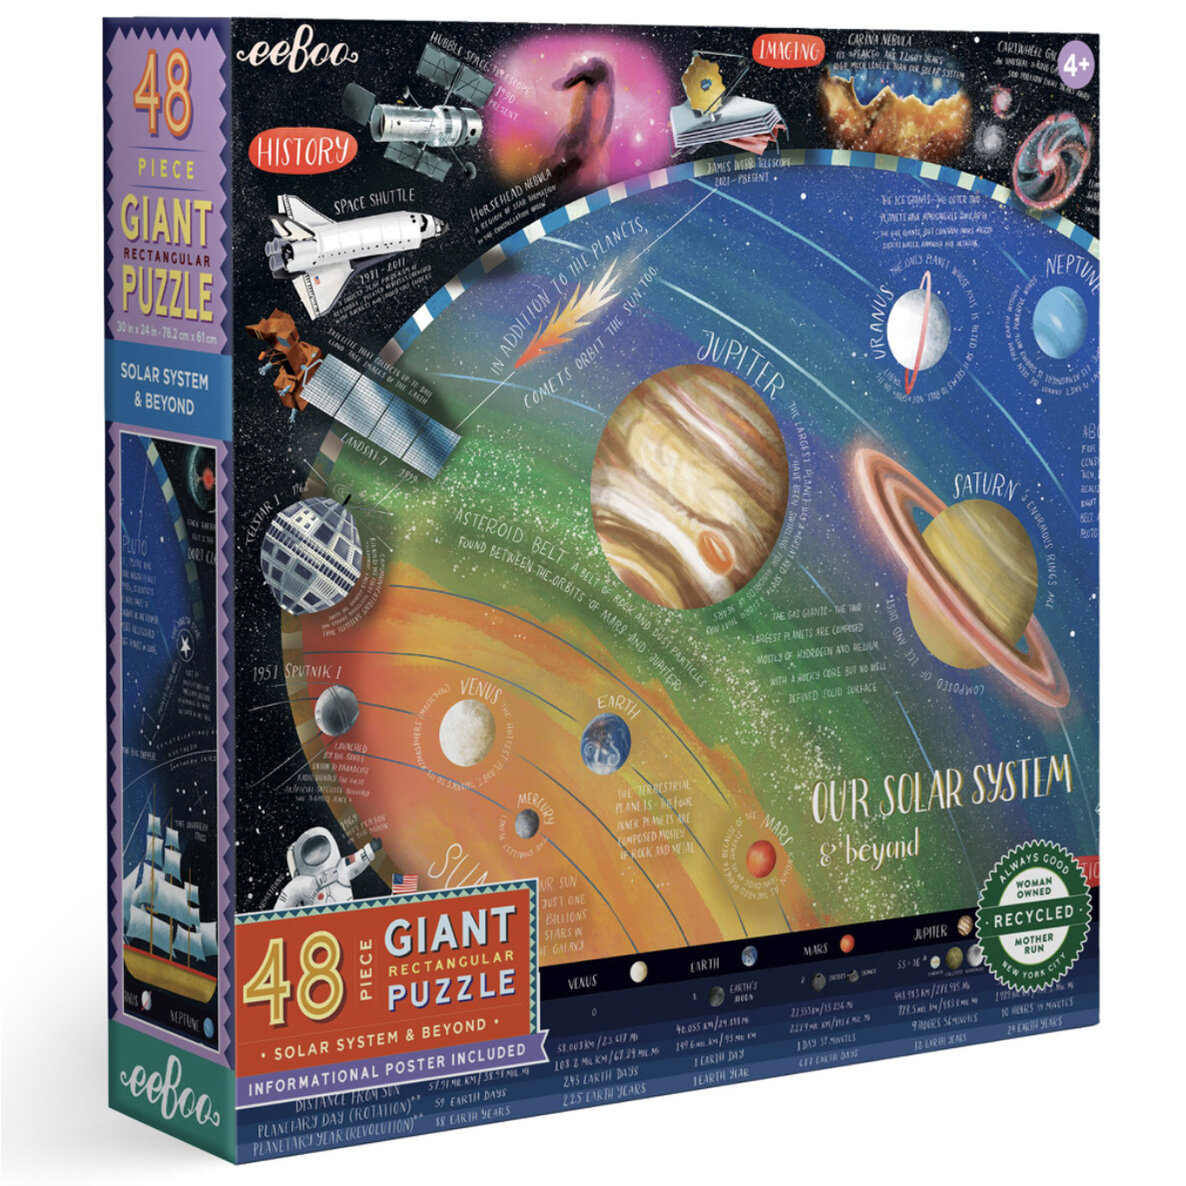 EeBoo 48 Piece Giant Puzzle Solar System & Beyond